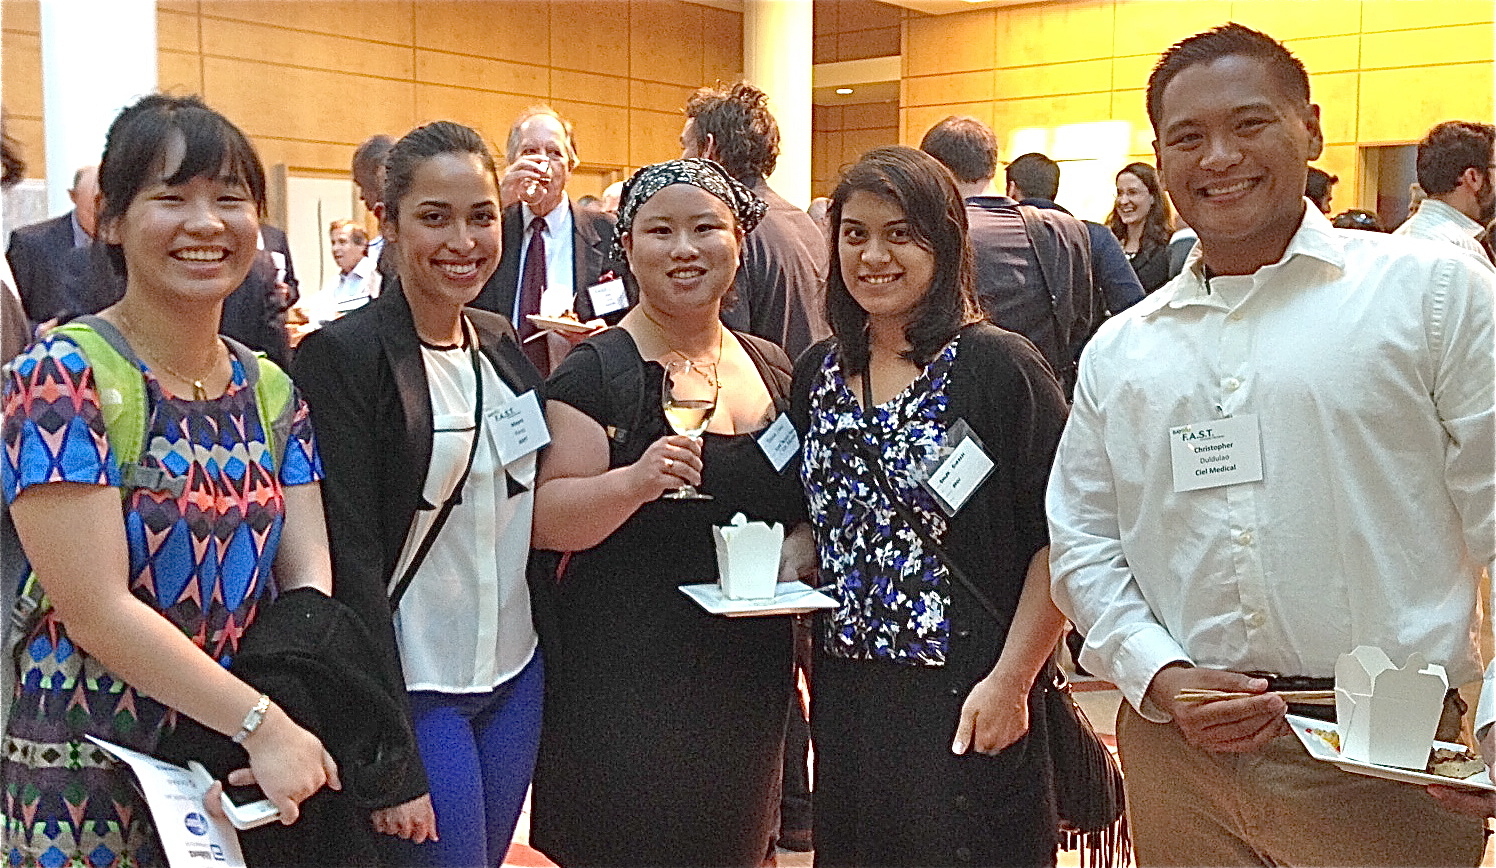 PSM students at the BaybioFAST program final showcase in spring 2014